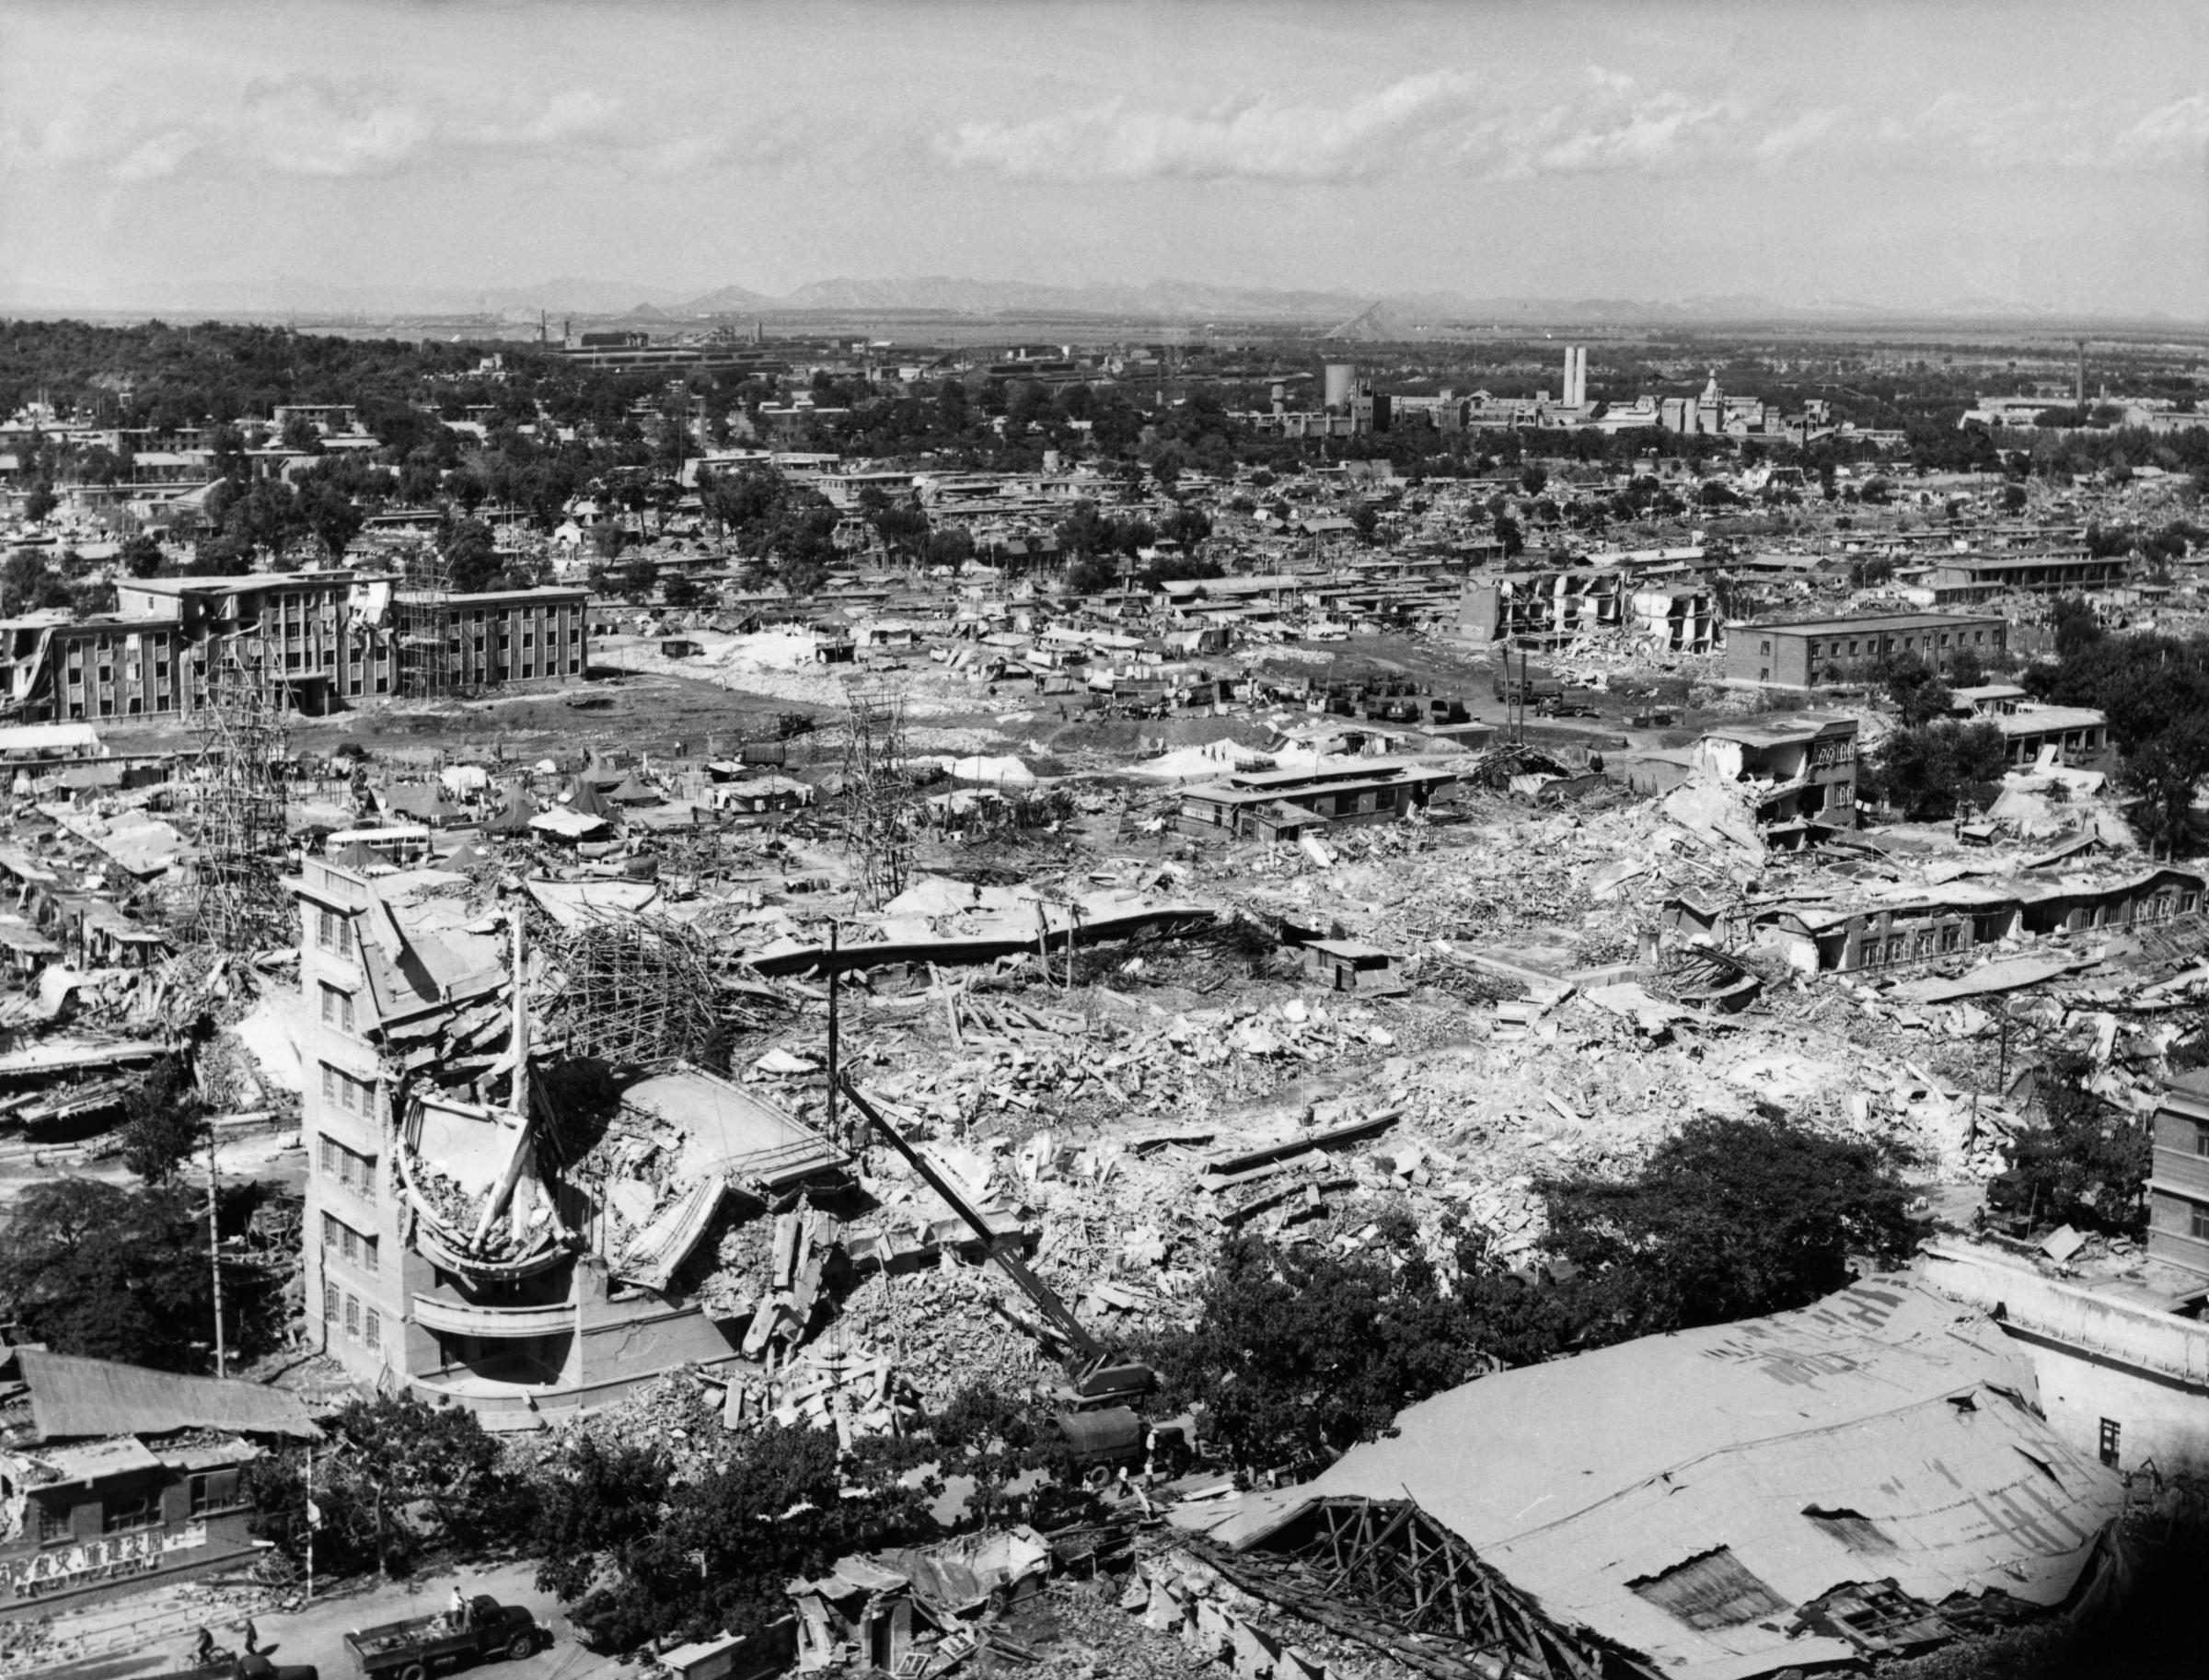 The aftermath of the Tangshan earthquake of 1976.